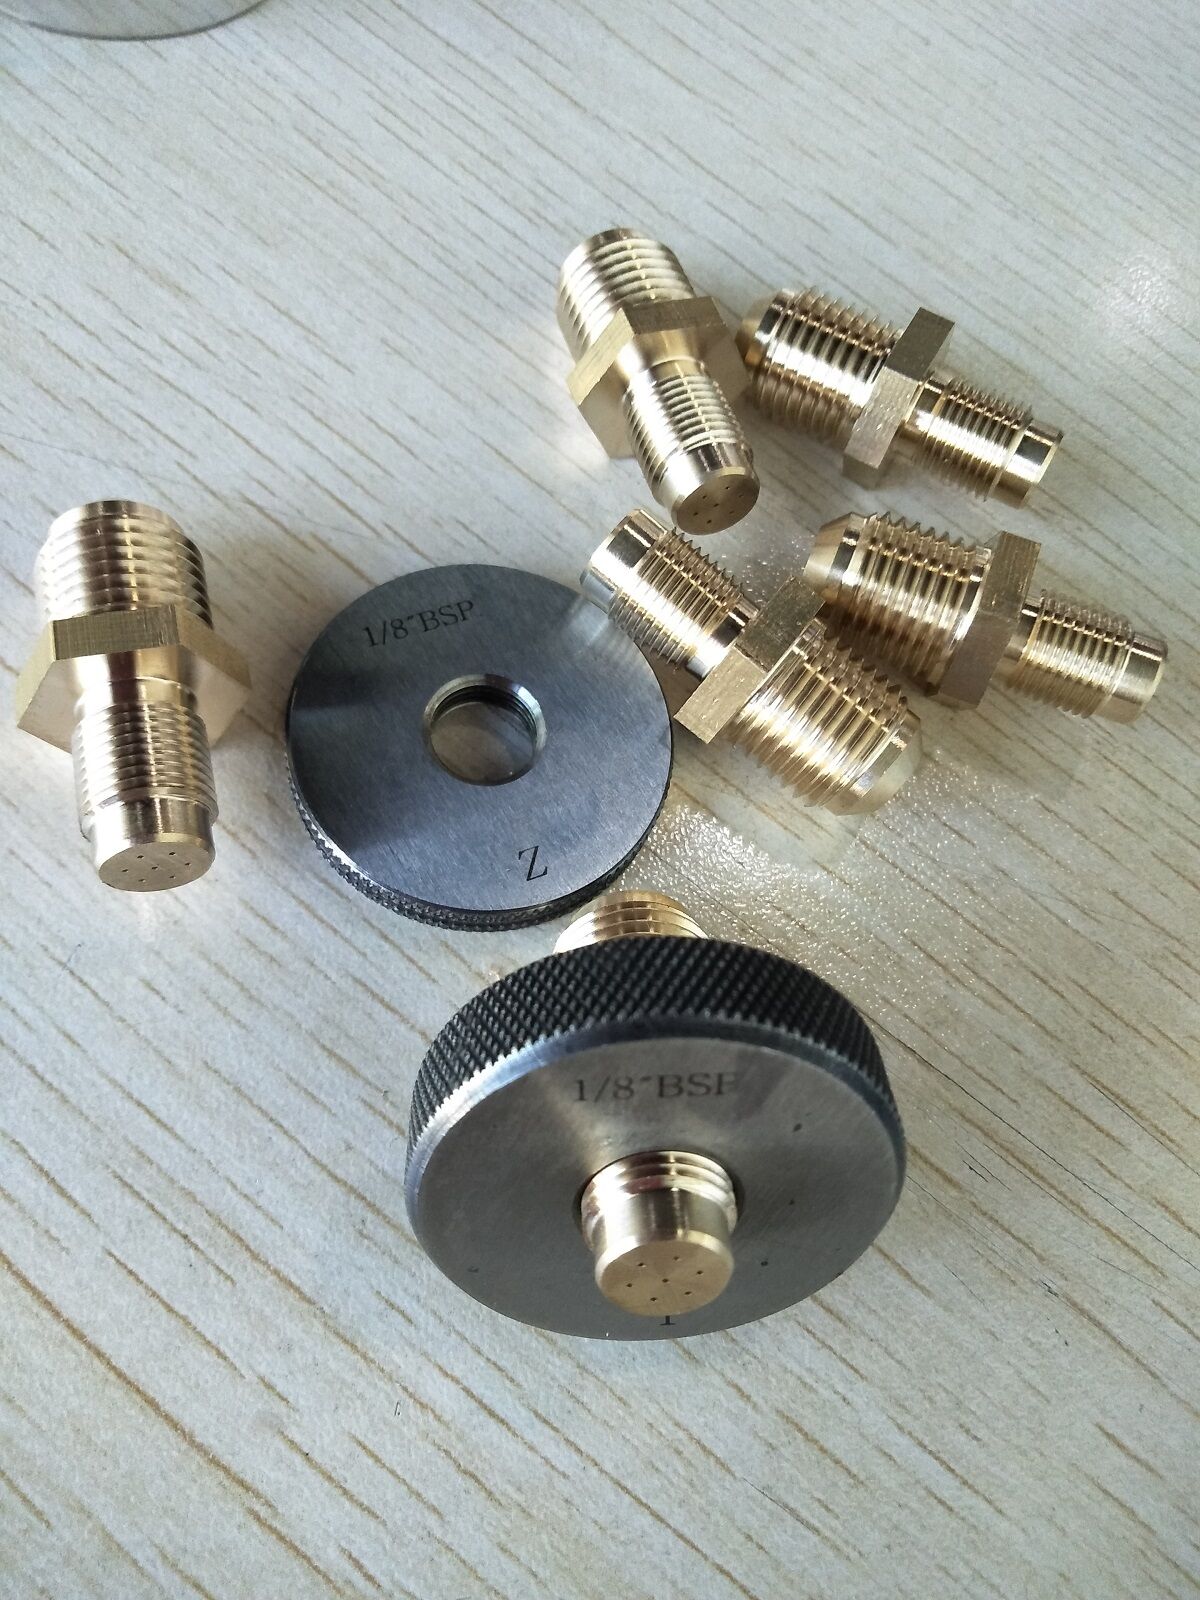 Durability and Longevity of Brass Fittings - Knowledge